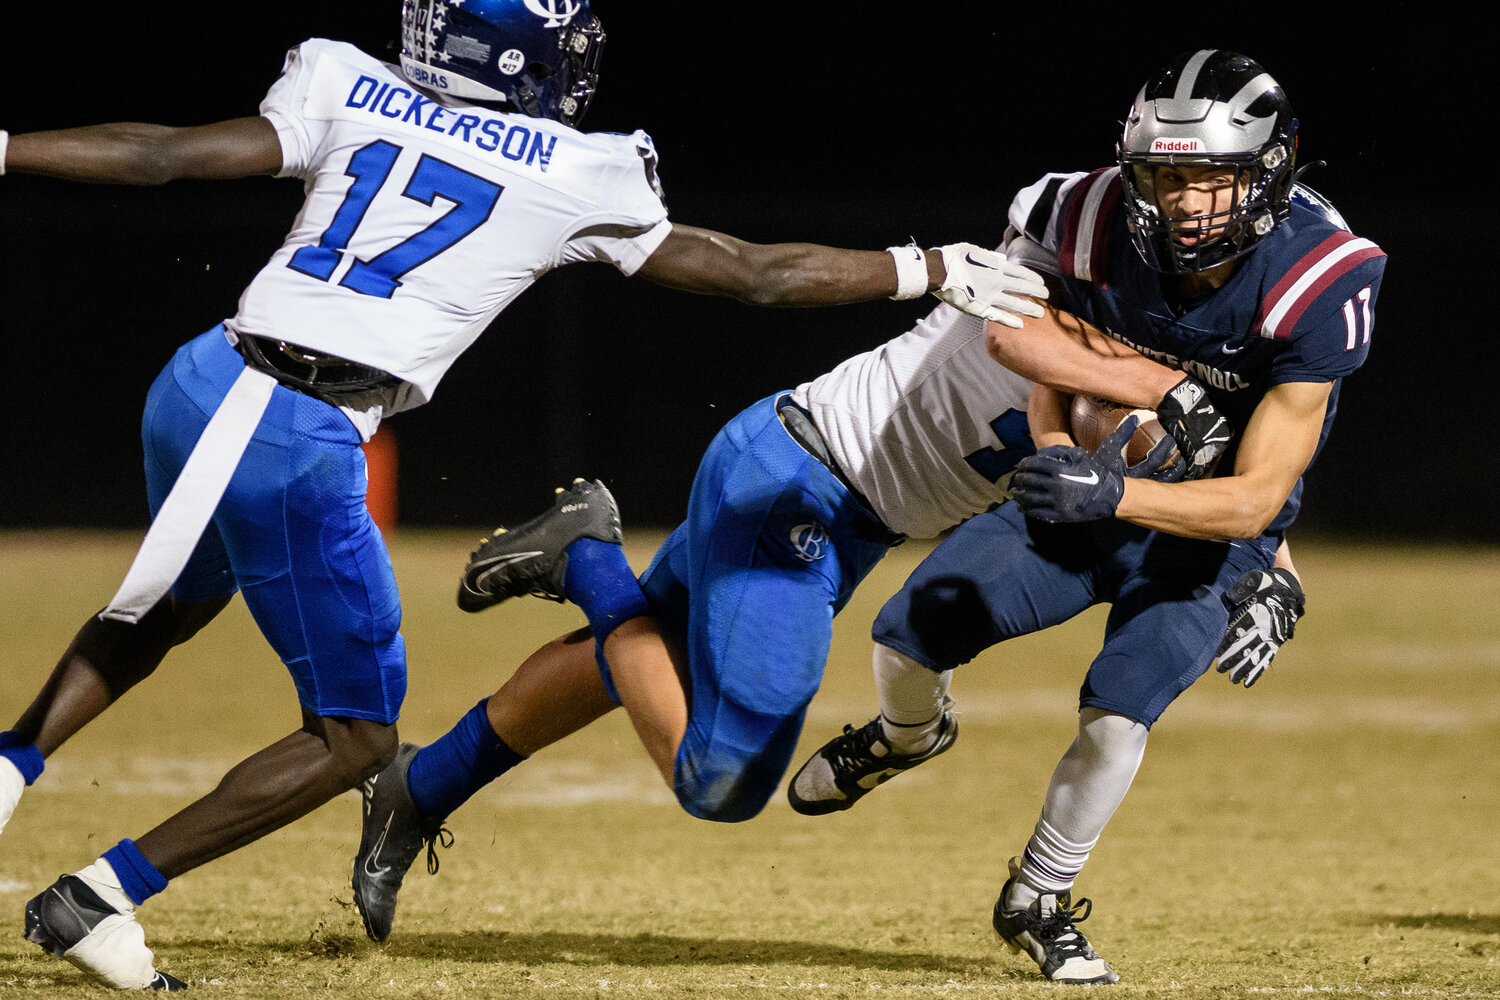 The White Knoll Timberwolves’ undefeated season continued with a 28-0 shutout of Cane Bay Nov. 3.